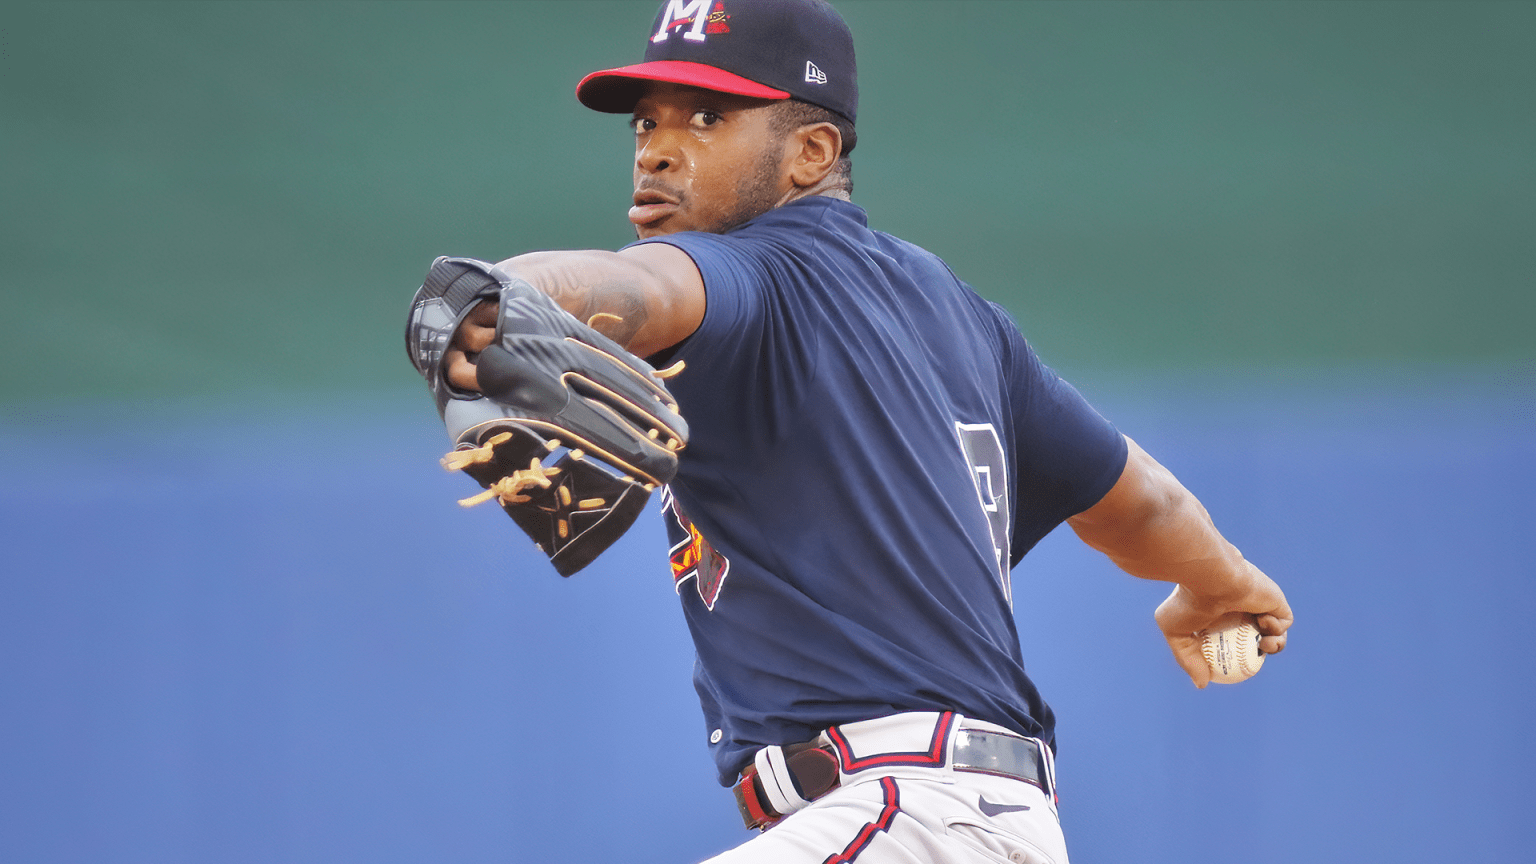 MLB Pipeline on X: "Darius Vines, the #Braves' No. 10 prospect, will make  his Major League debut by starting Wednesday's game, per @mlbbowman. More  on the righty with a 2.86 ERA in